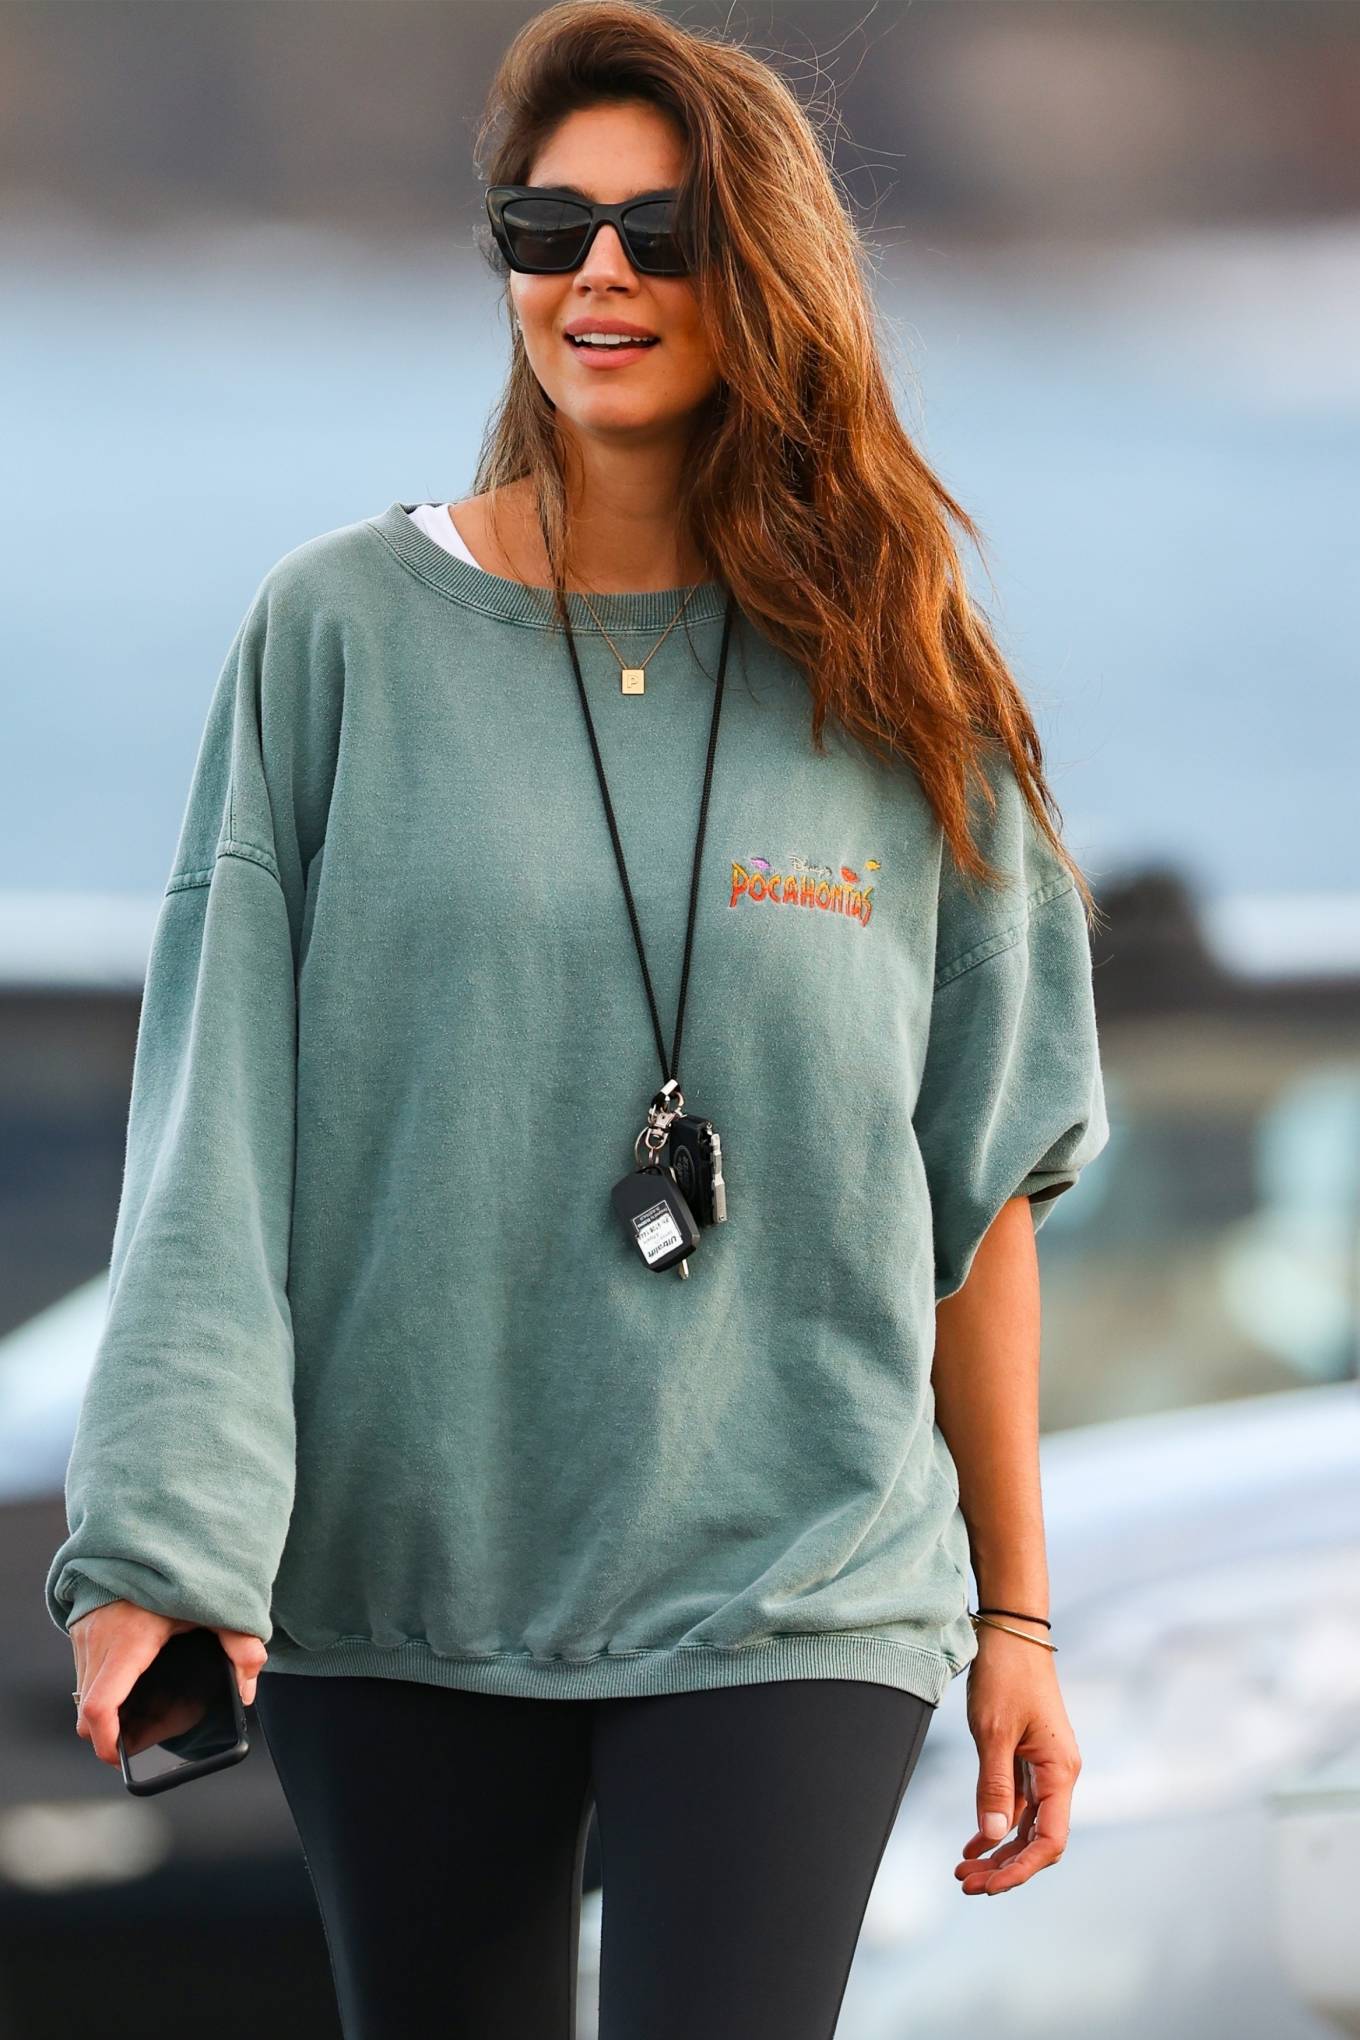 Pia Miller â€“ Out in Sydney